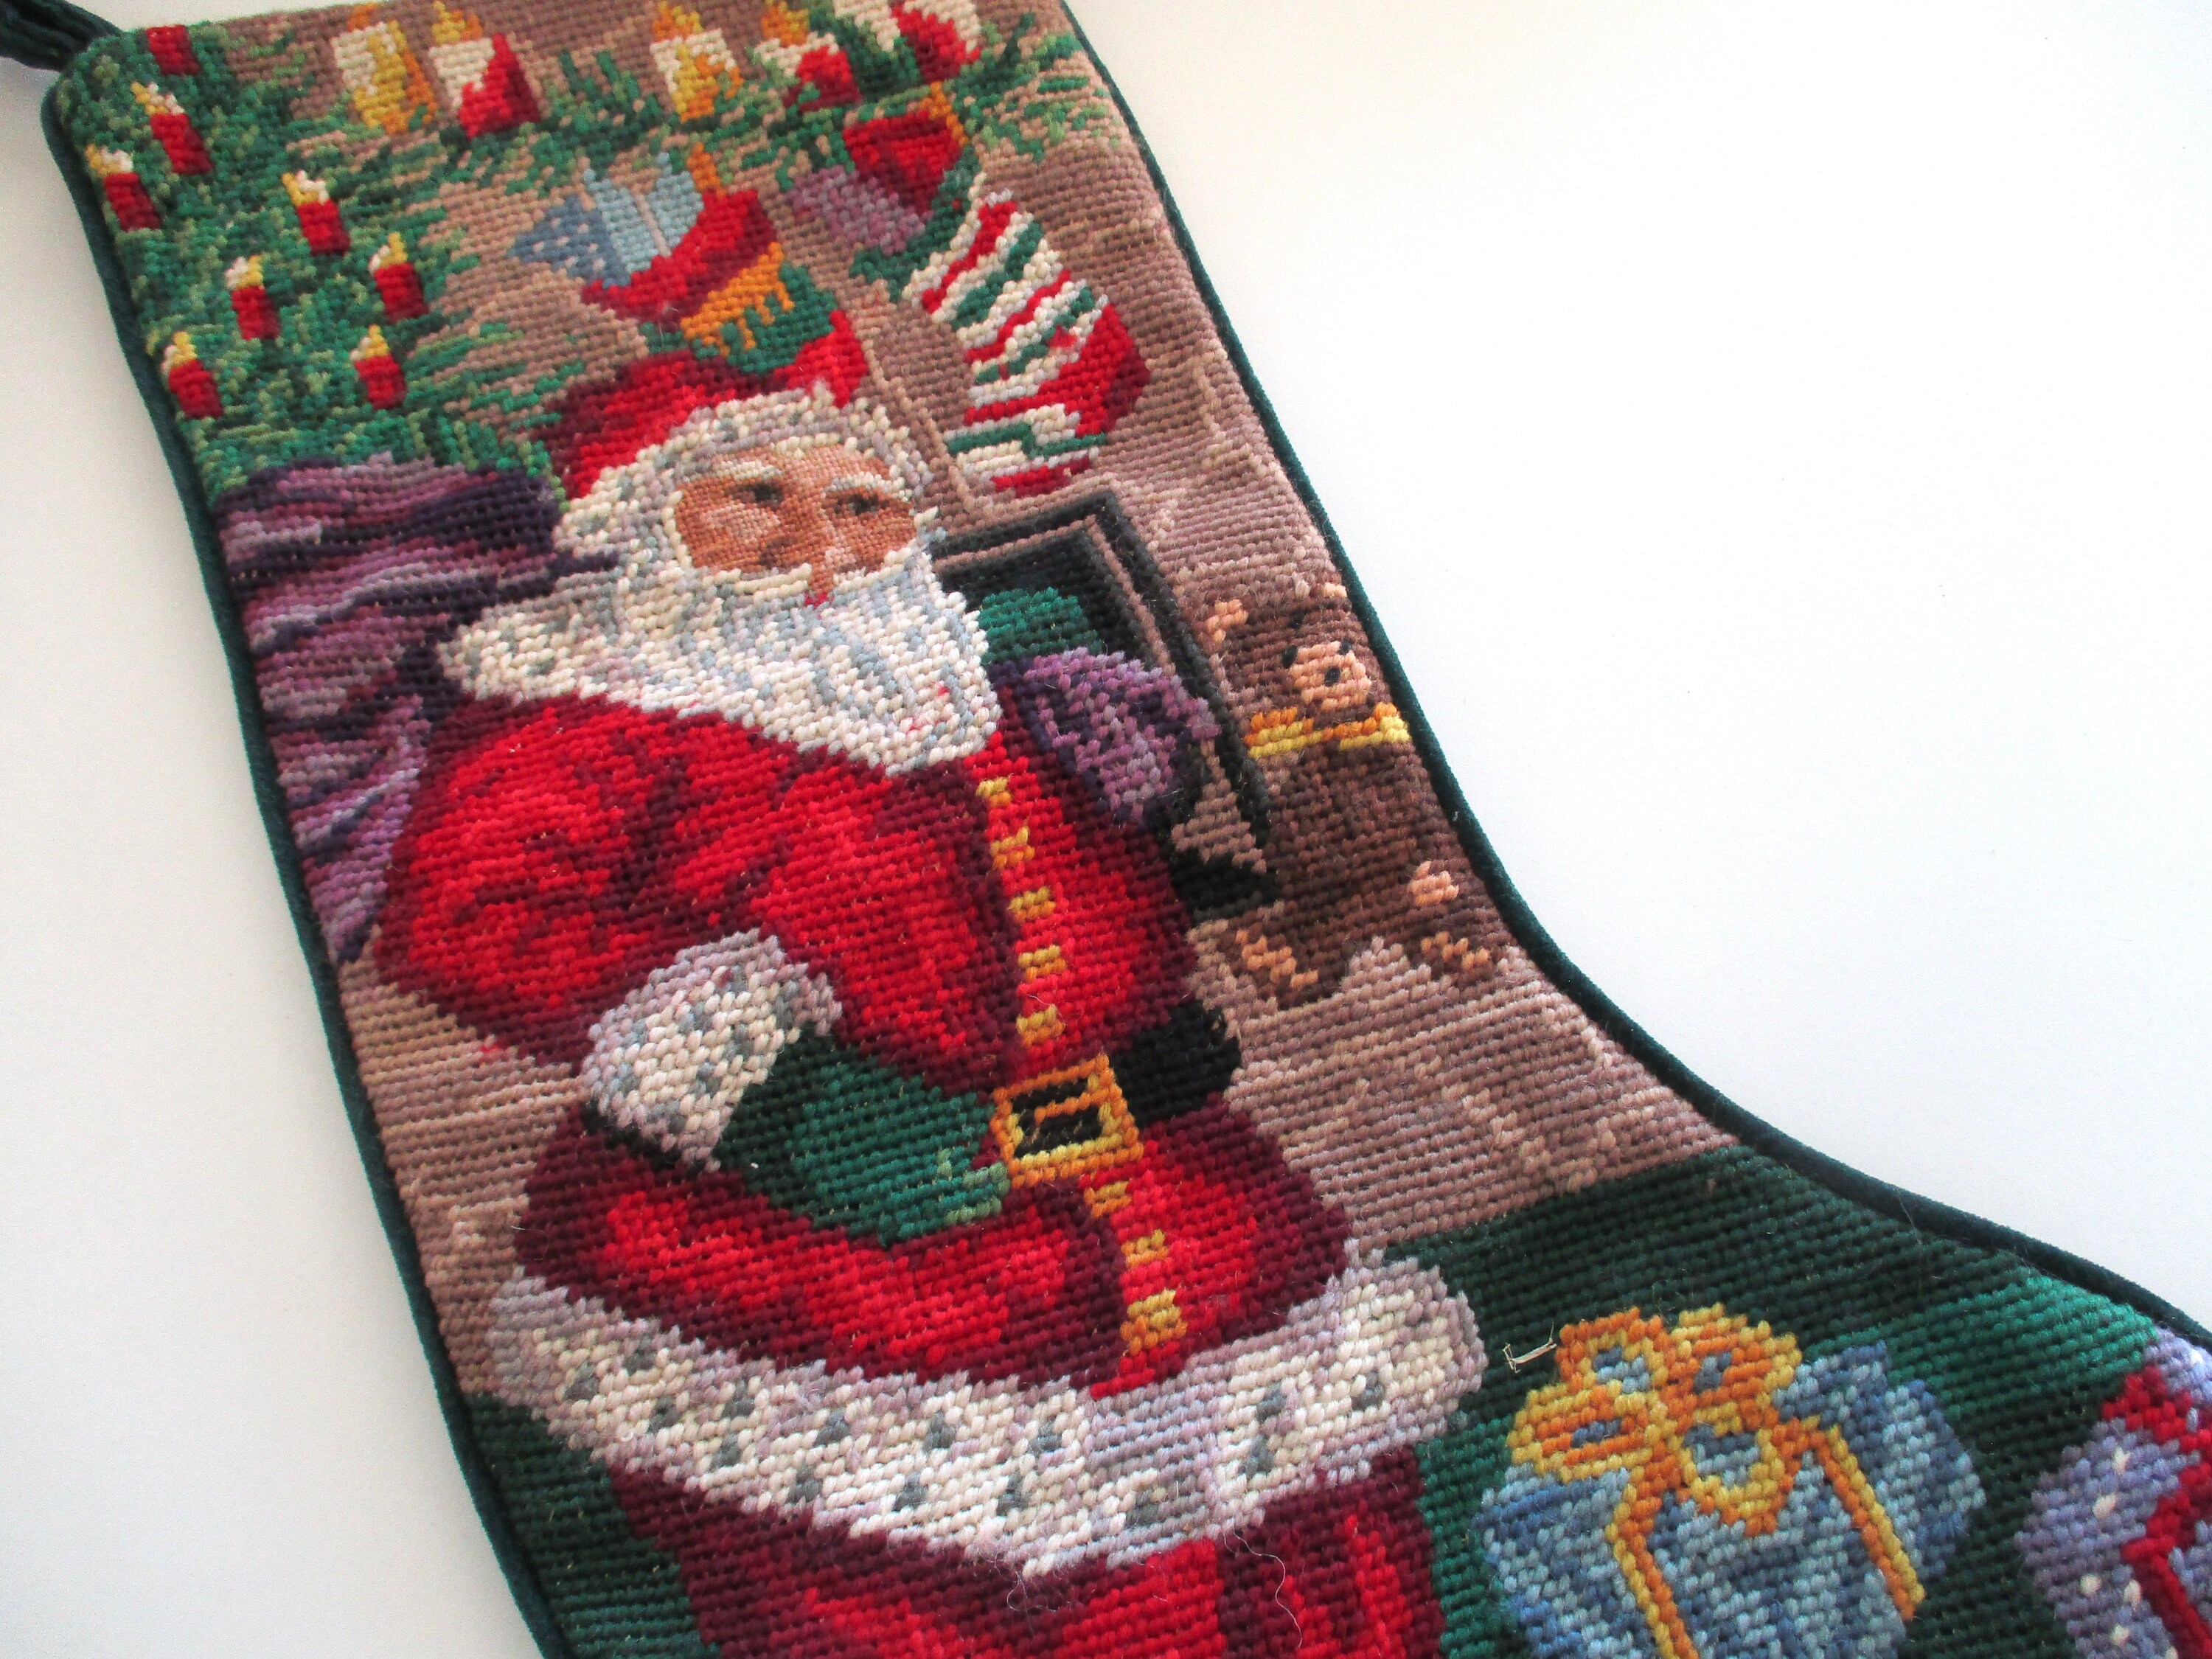 Personalized Needlepoint Christmas Stockings A Festive Touch for